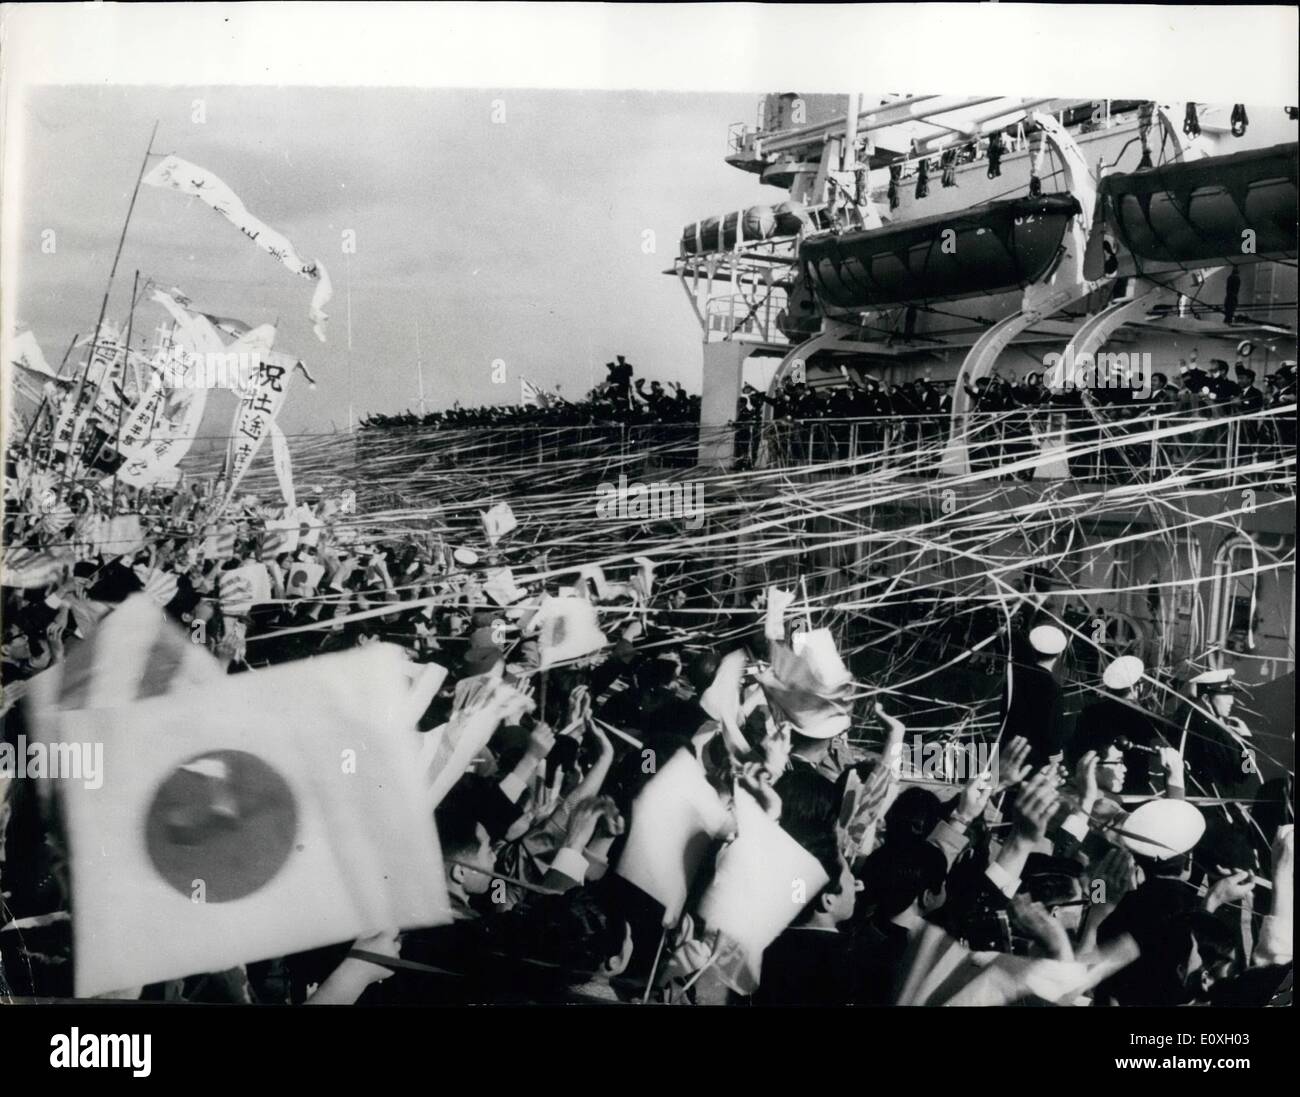 Dec. 12, 1966 - White Christmas For Antarctic Explorers. The Japanese ice-breaker ''Fuji'' gets a gala send-off from wives, children and relatives of the crew on sailing from Harumi Pier, Tokyo for the Antarctic on Japan's eighth expedition into the great white continent. The 7,760-ton ''Fuji'' carried a 40-member party of scientists, a crew of 182 officers and men, and five newspapermen to the Showa Base on Angul Island, where two helicopters carried in the ice-breaker will start transporting supplies for the 24 scientists who will remain behind during the winter, and return to Tokyo Stock Photo